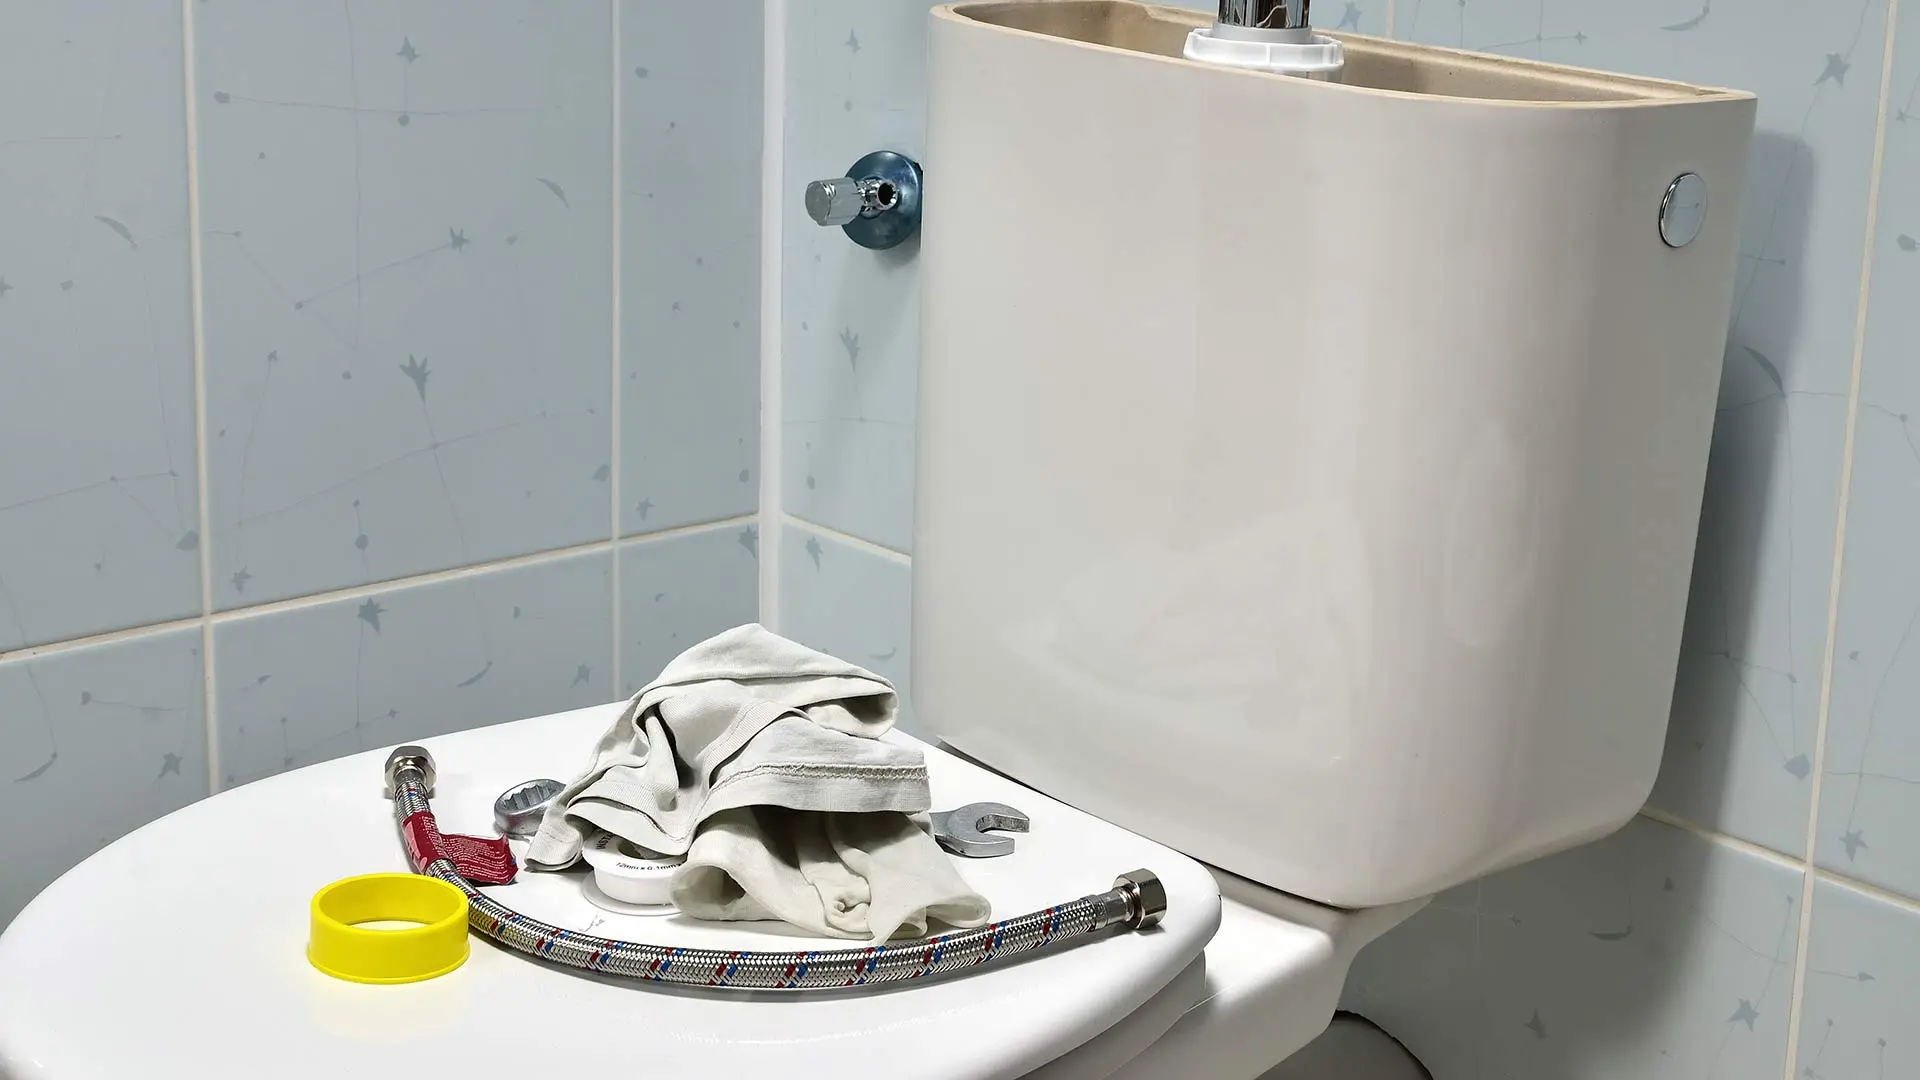 6 Things You Should Never Flush Down Your Toilet